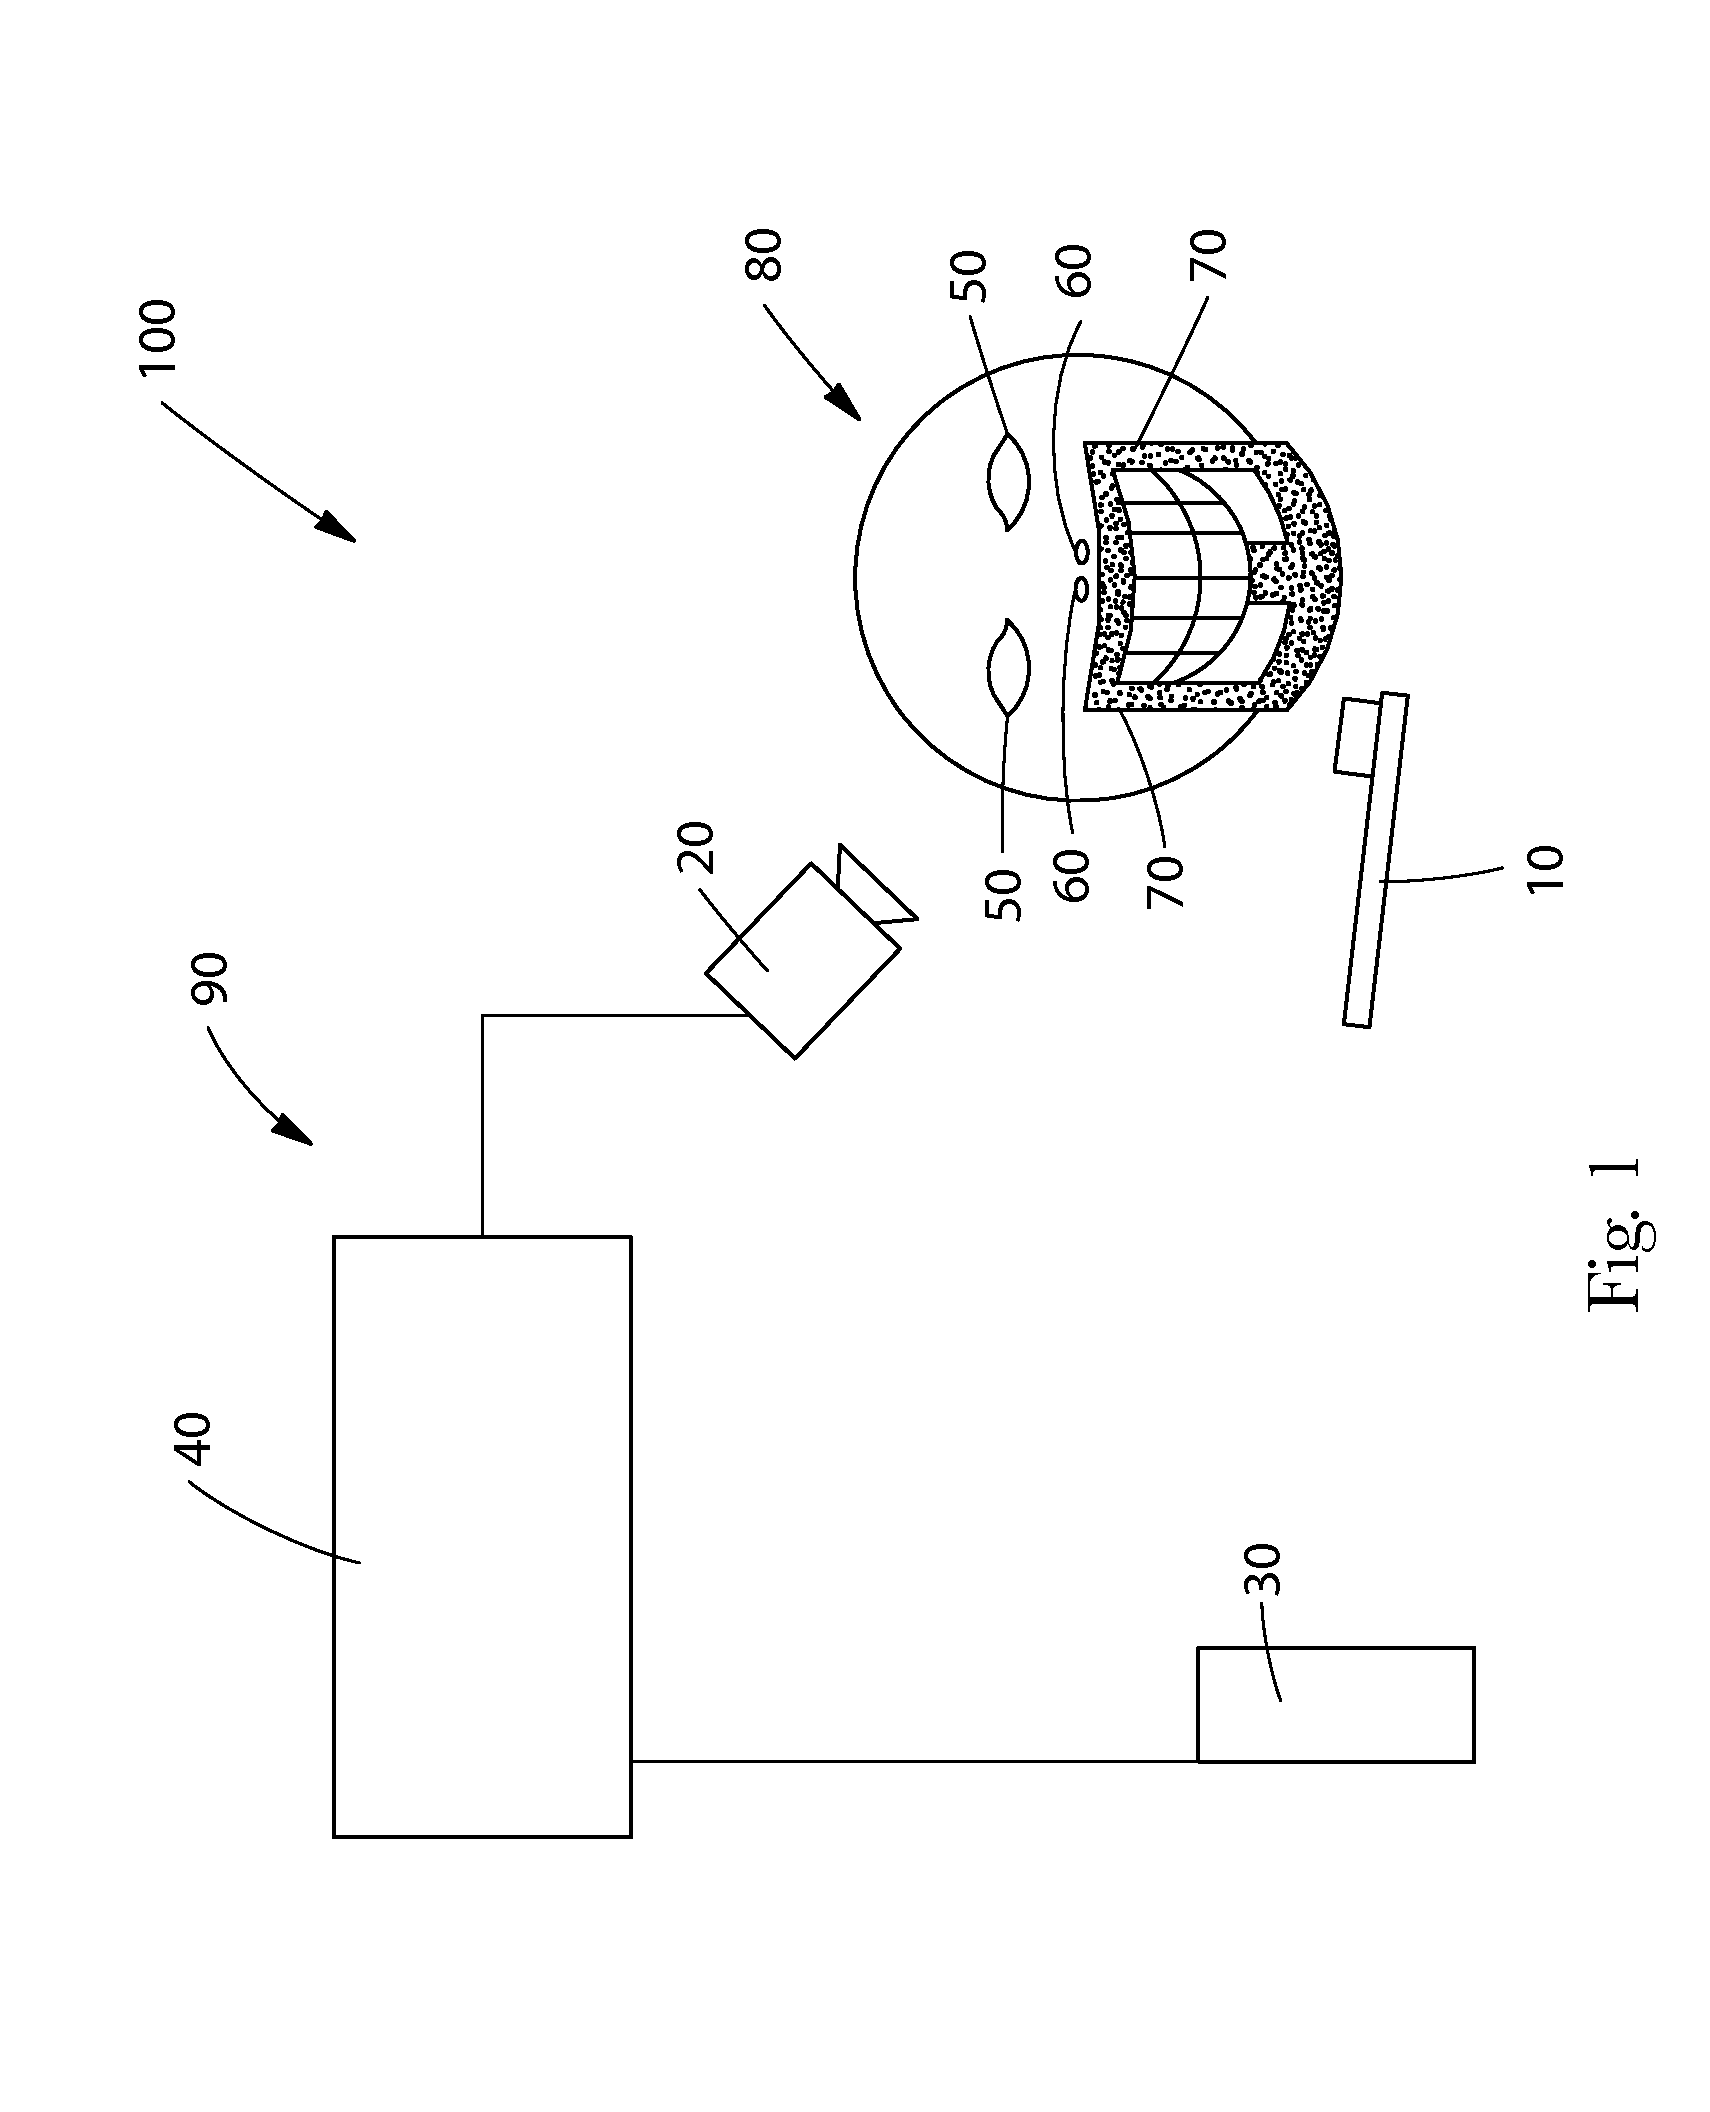 Personal Hygiene Devices, Systems and Methods